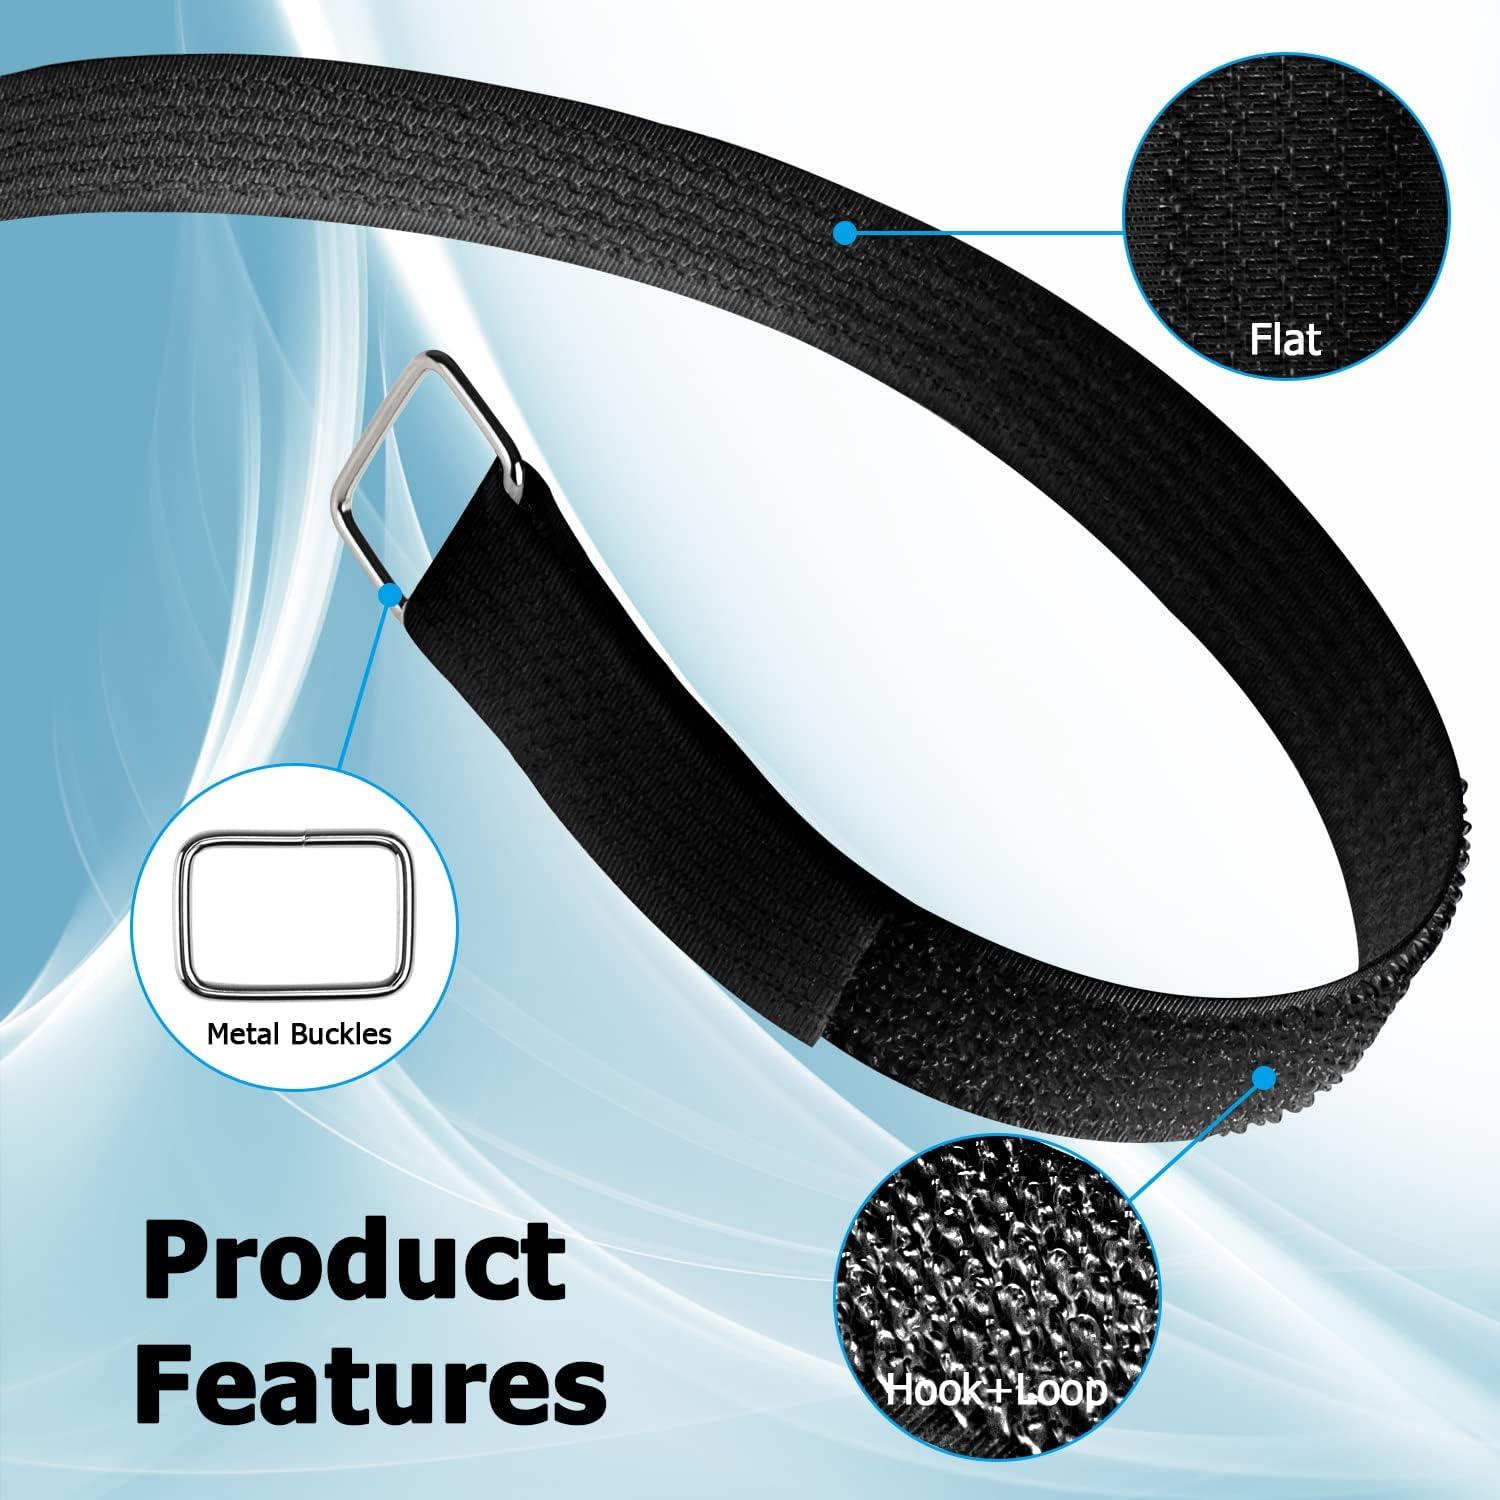 Nearockle 36ft Hook and Loop Straps Adjustable Cut-to-Length Cable Straps  3/4 Inch Reusable Nylon Fastening Tape Cable Ties for Organizer or Storage  with 50 Metal Buckles and Scissors (Black)